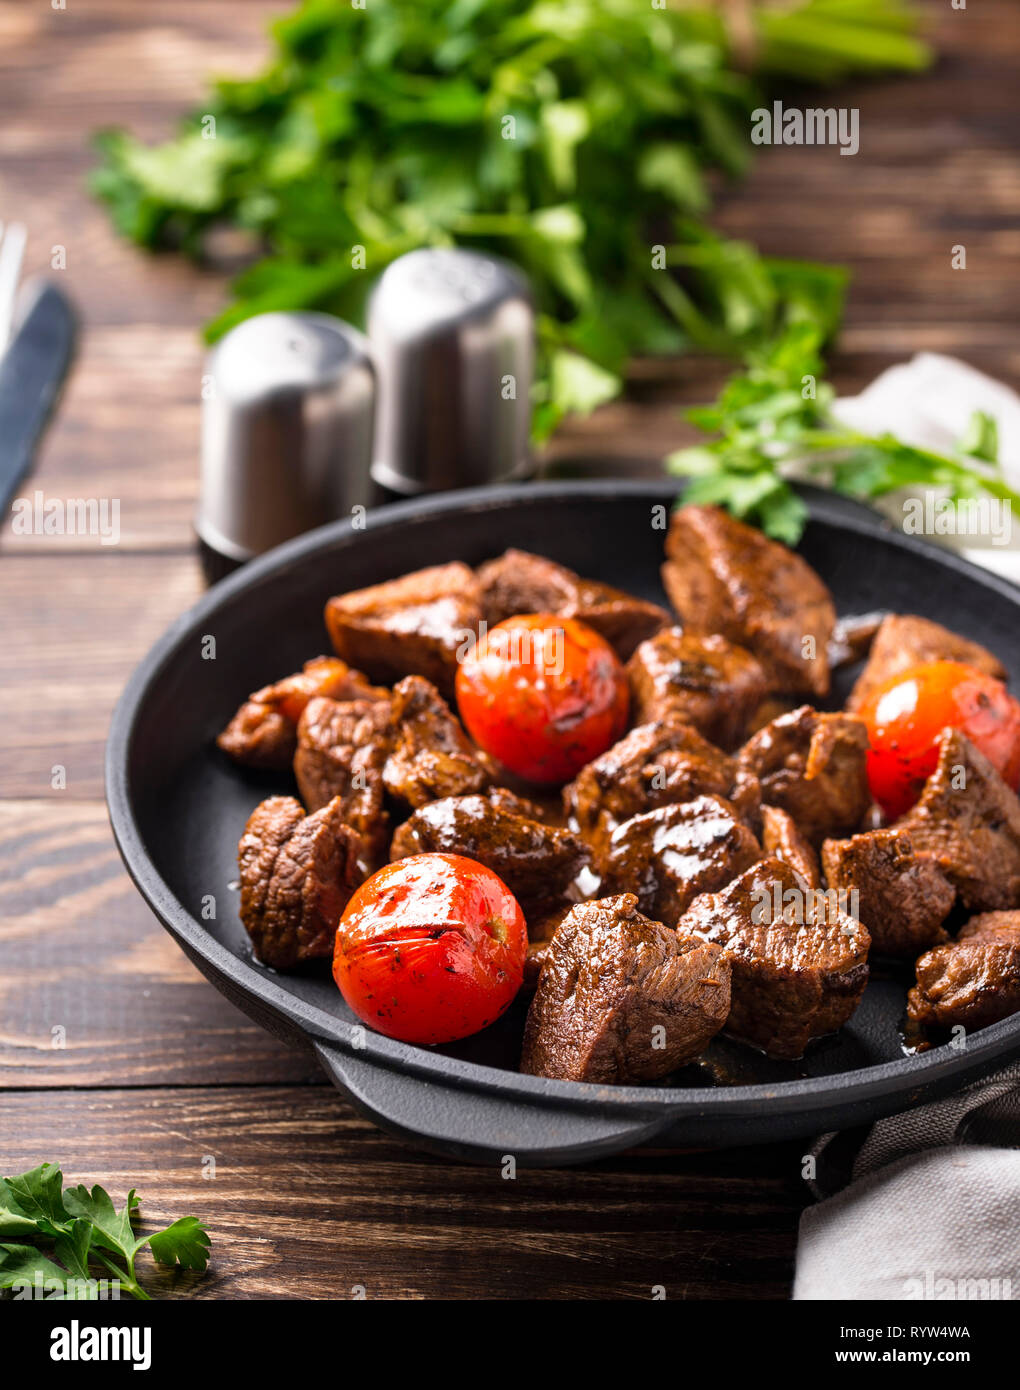 Roasted or stewed beef meat with tomato Stock Photo